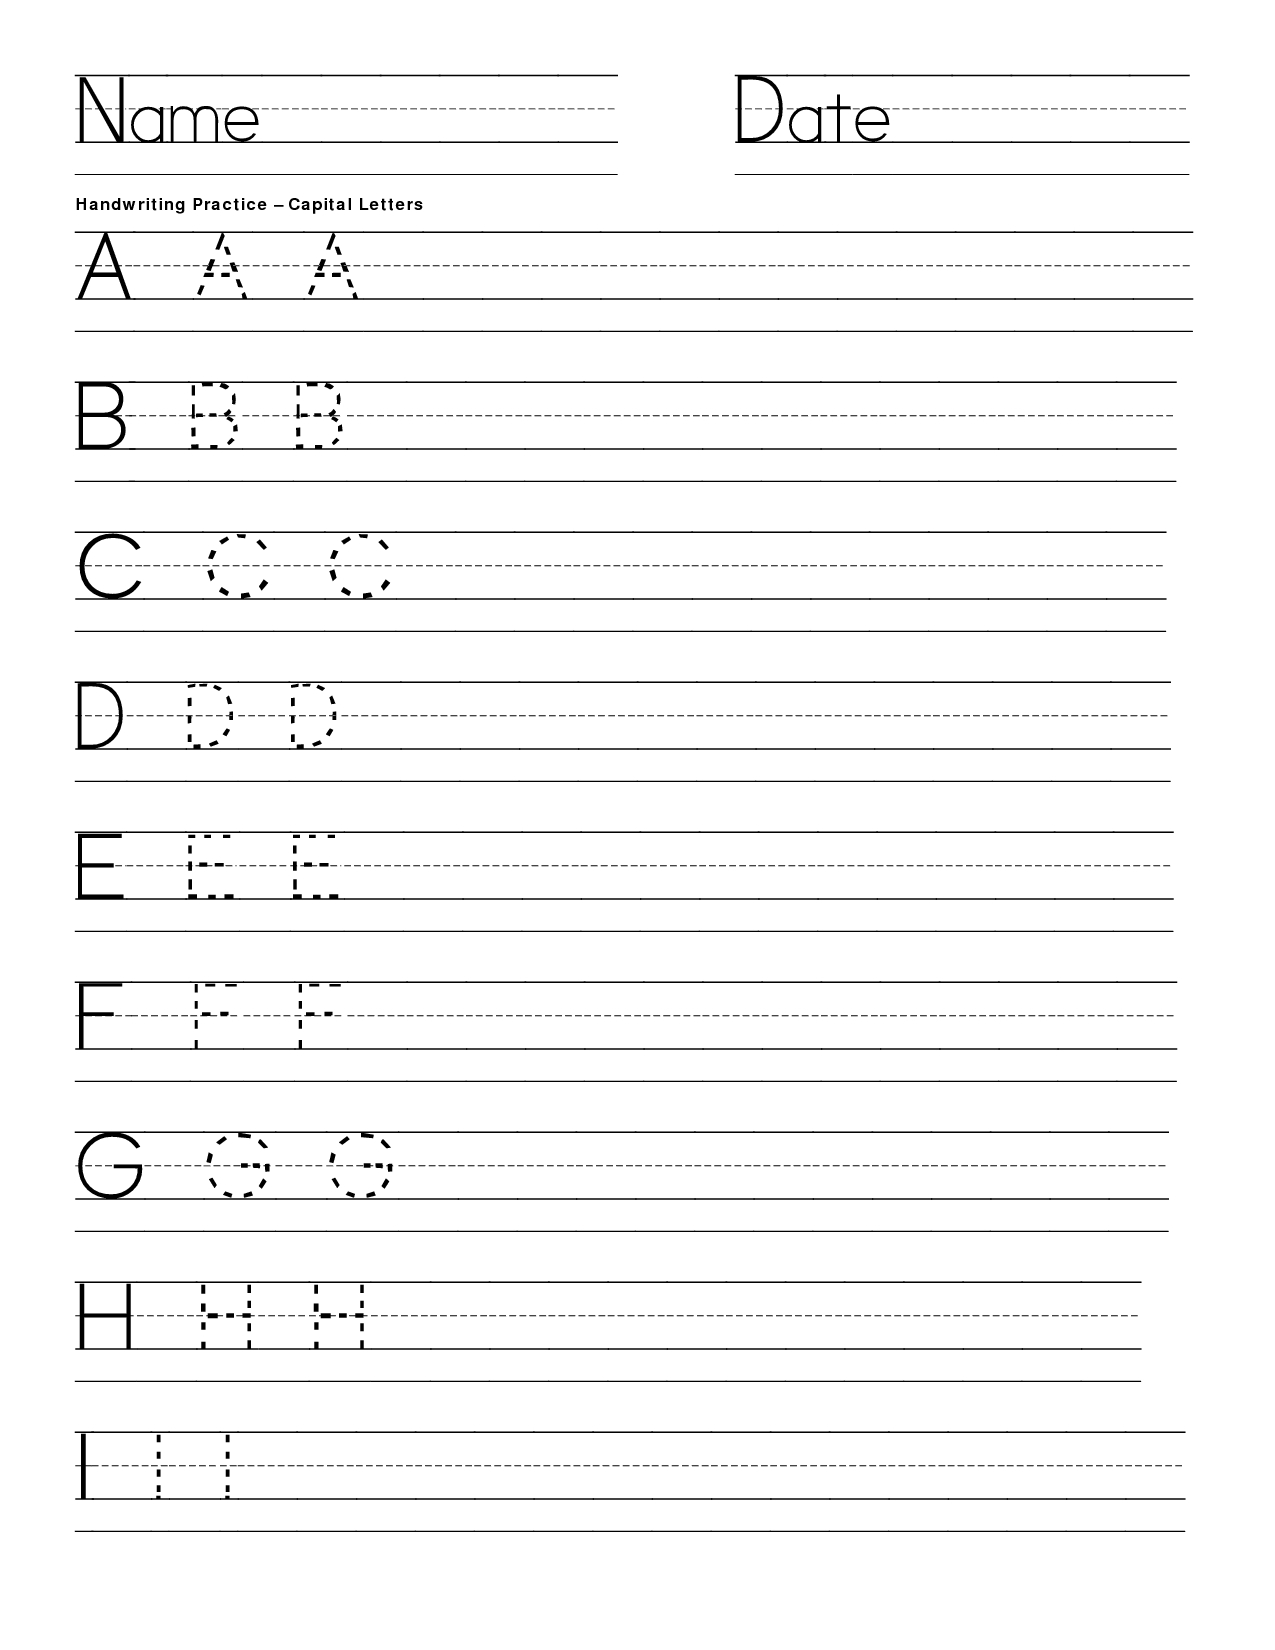 Letter Practice 1 | Free Handwriting Worksheets, Printable throughout Handwriting Practice Tracing Letters